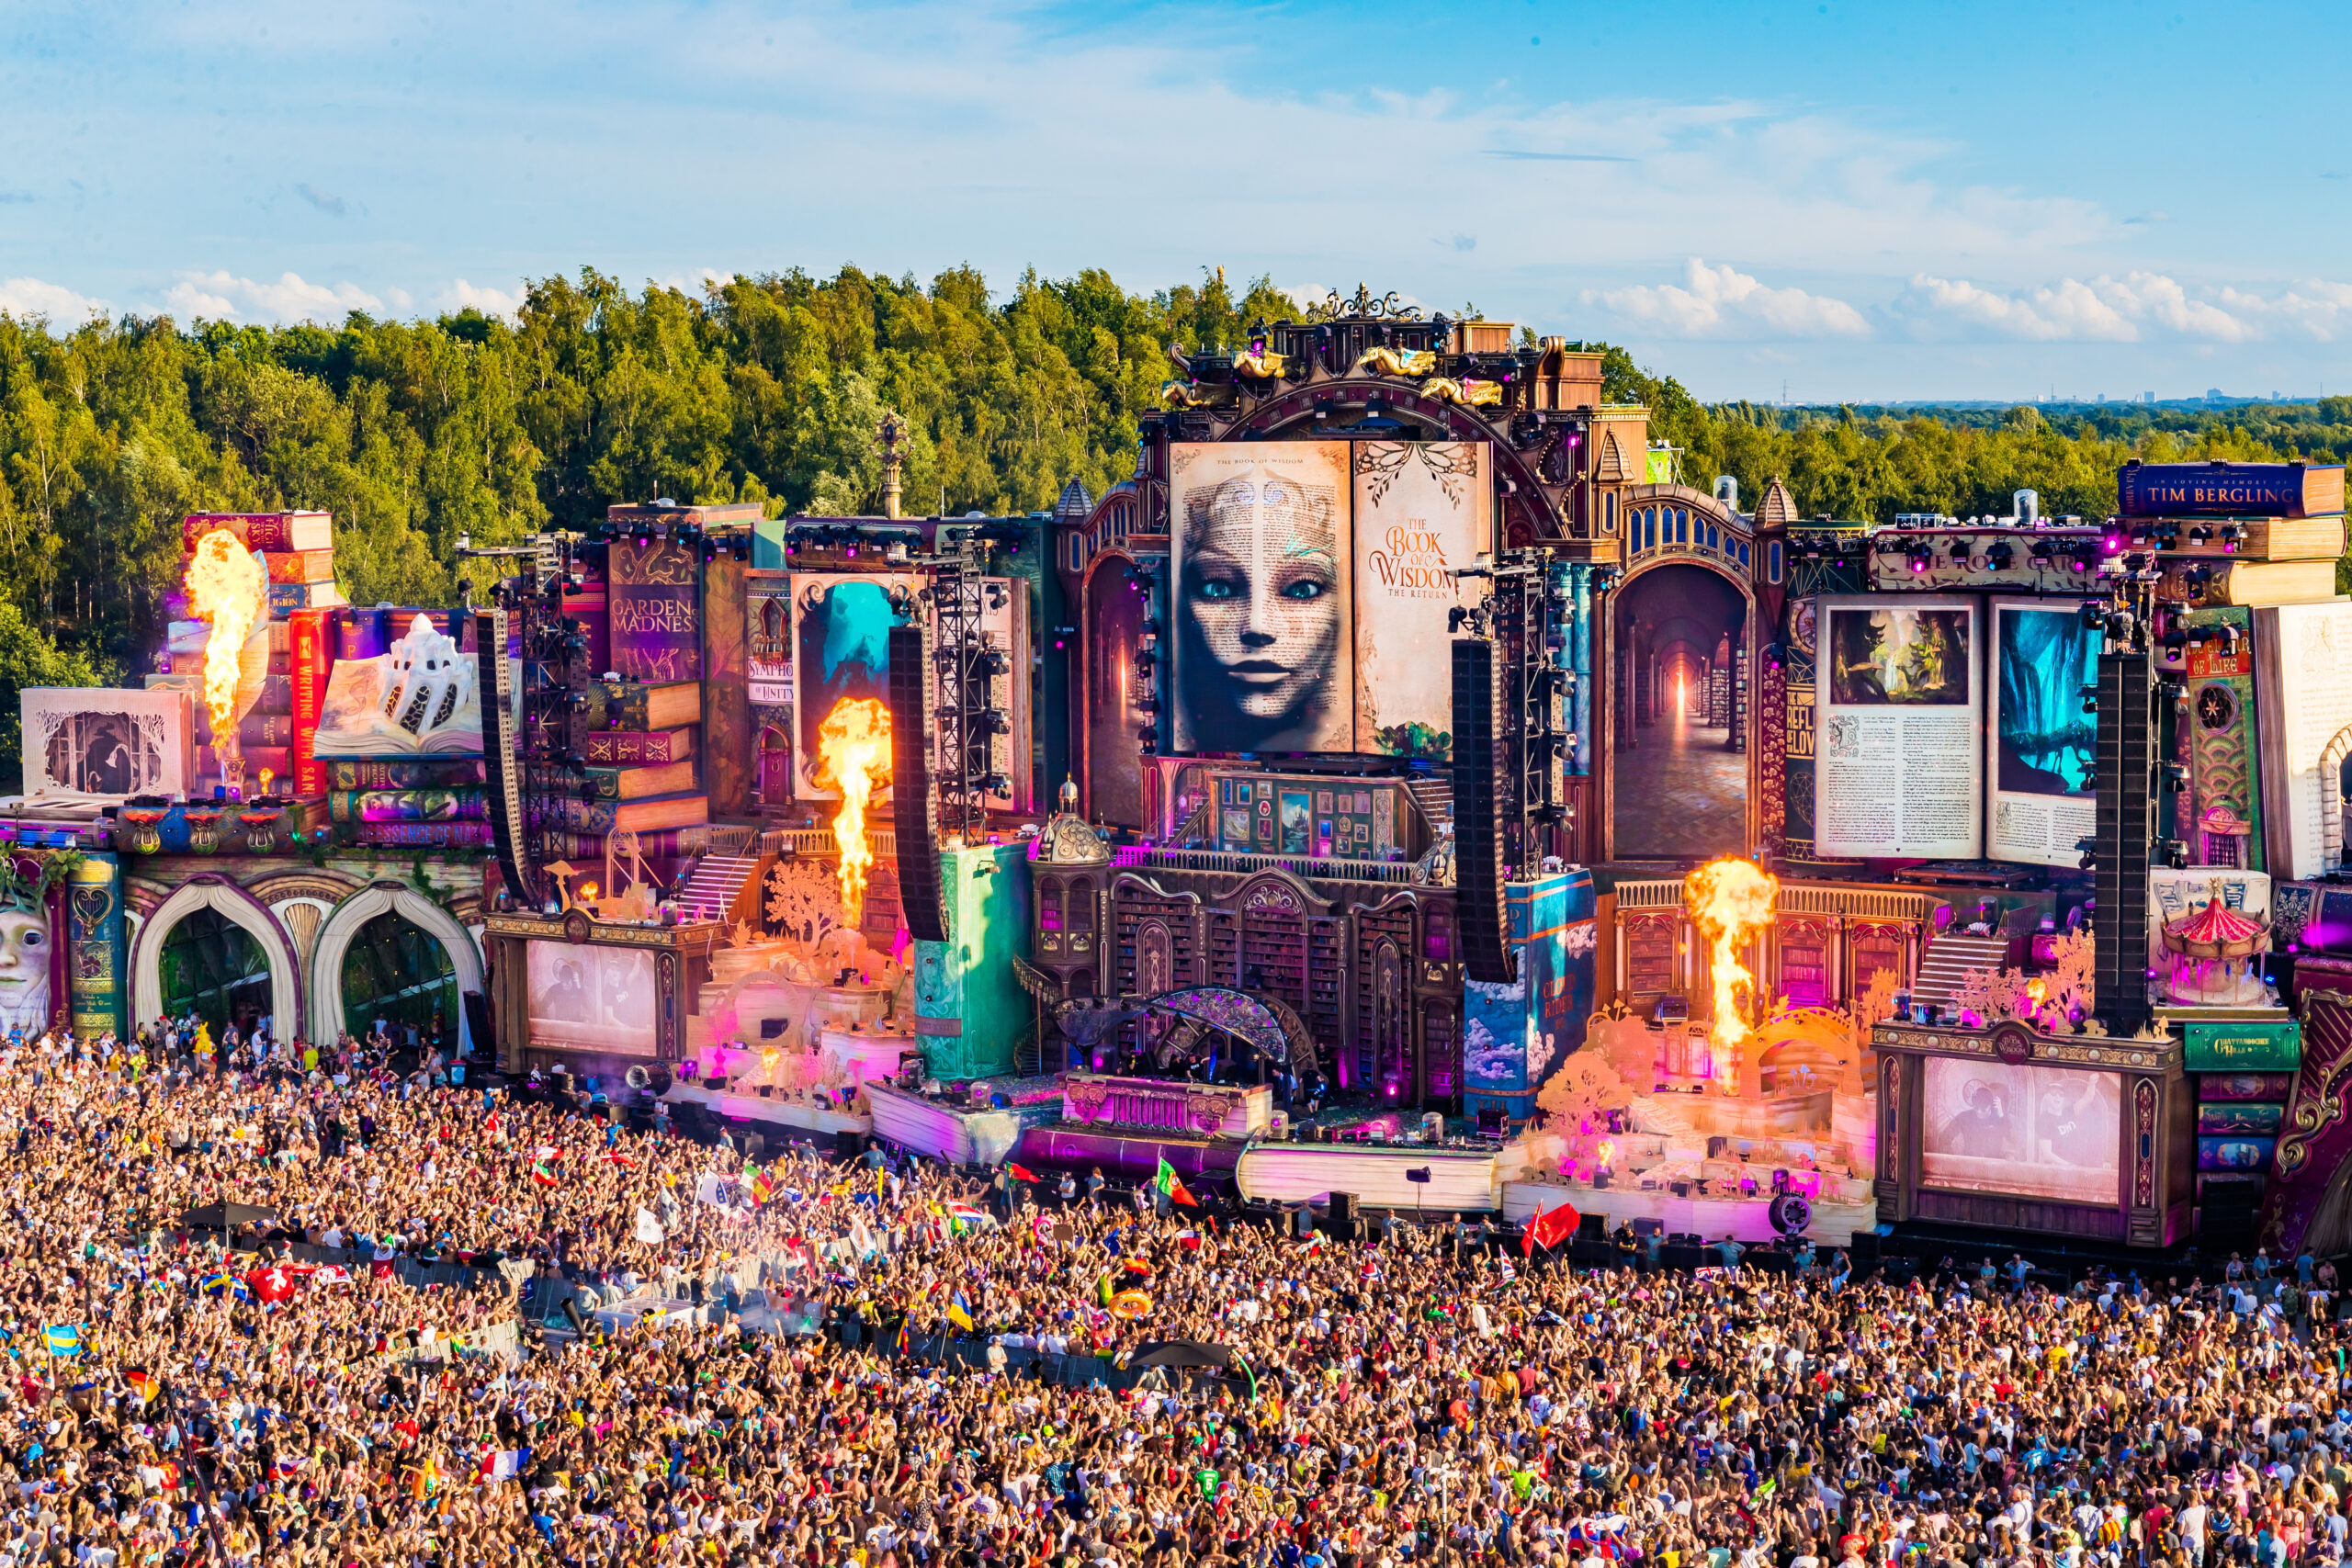 Tickets & Packages for Tomorrowland Around the World, are available now